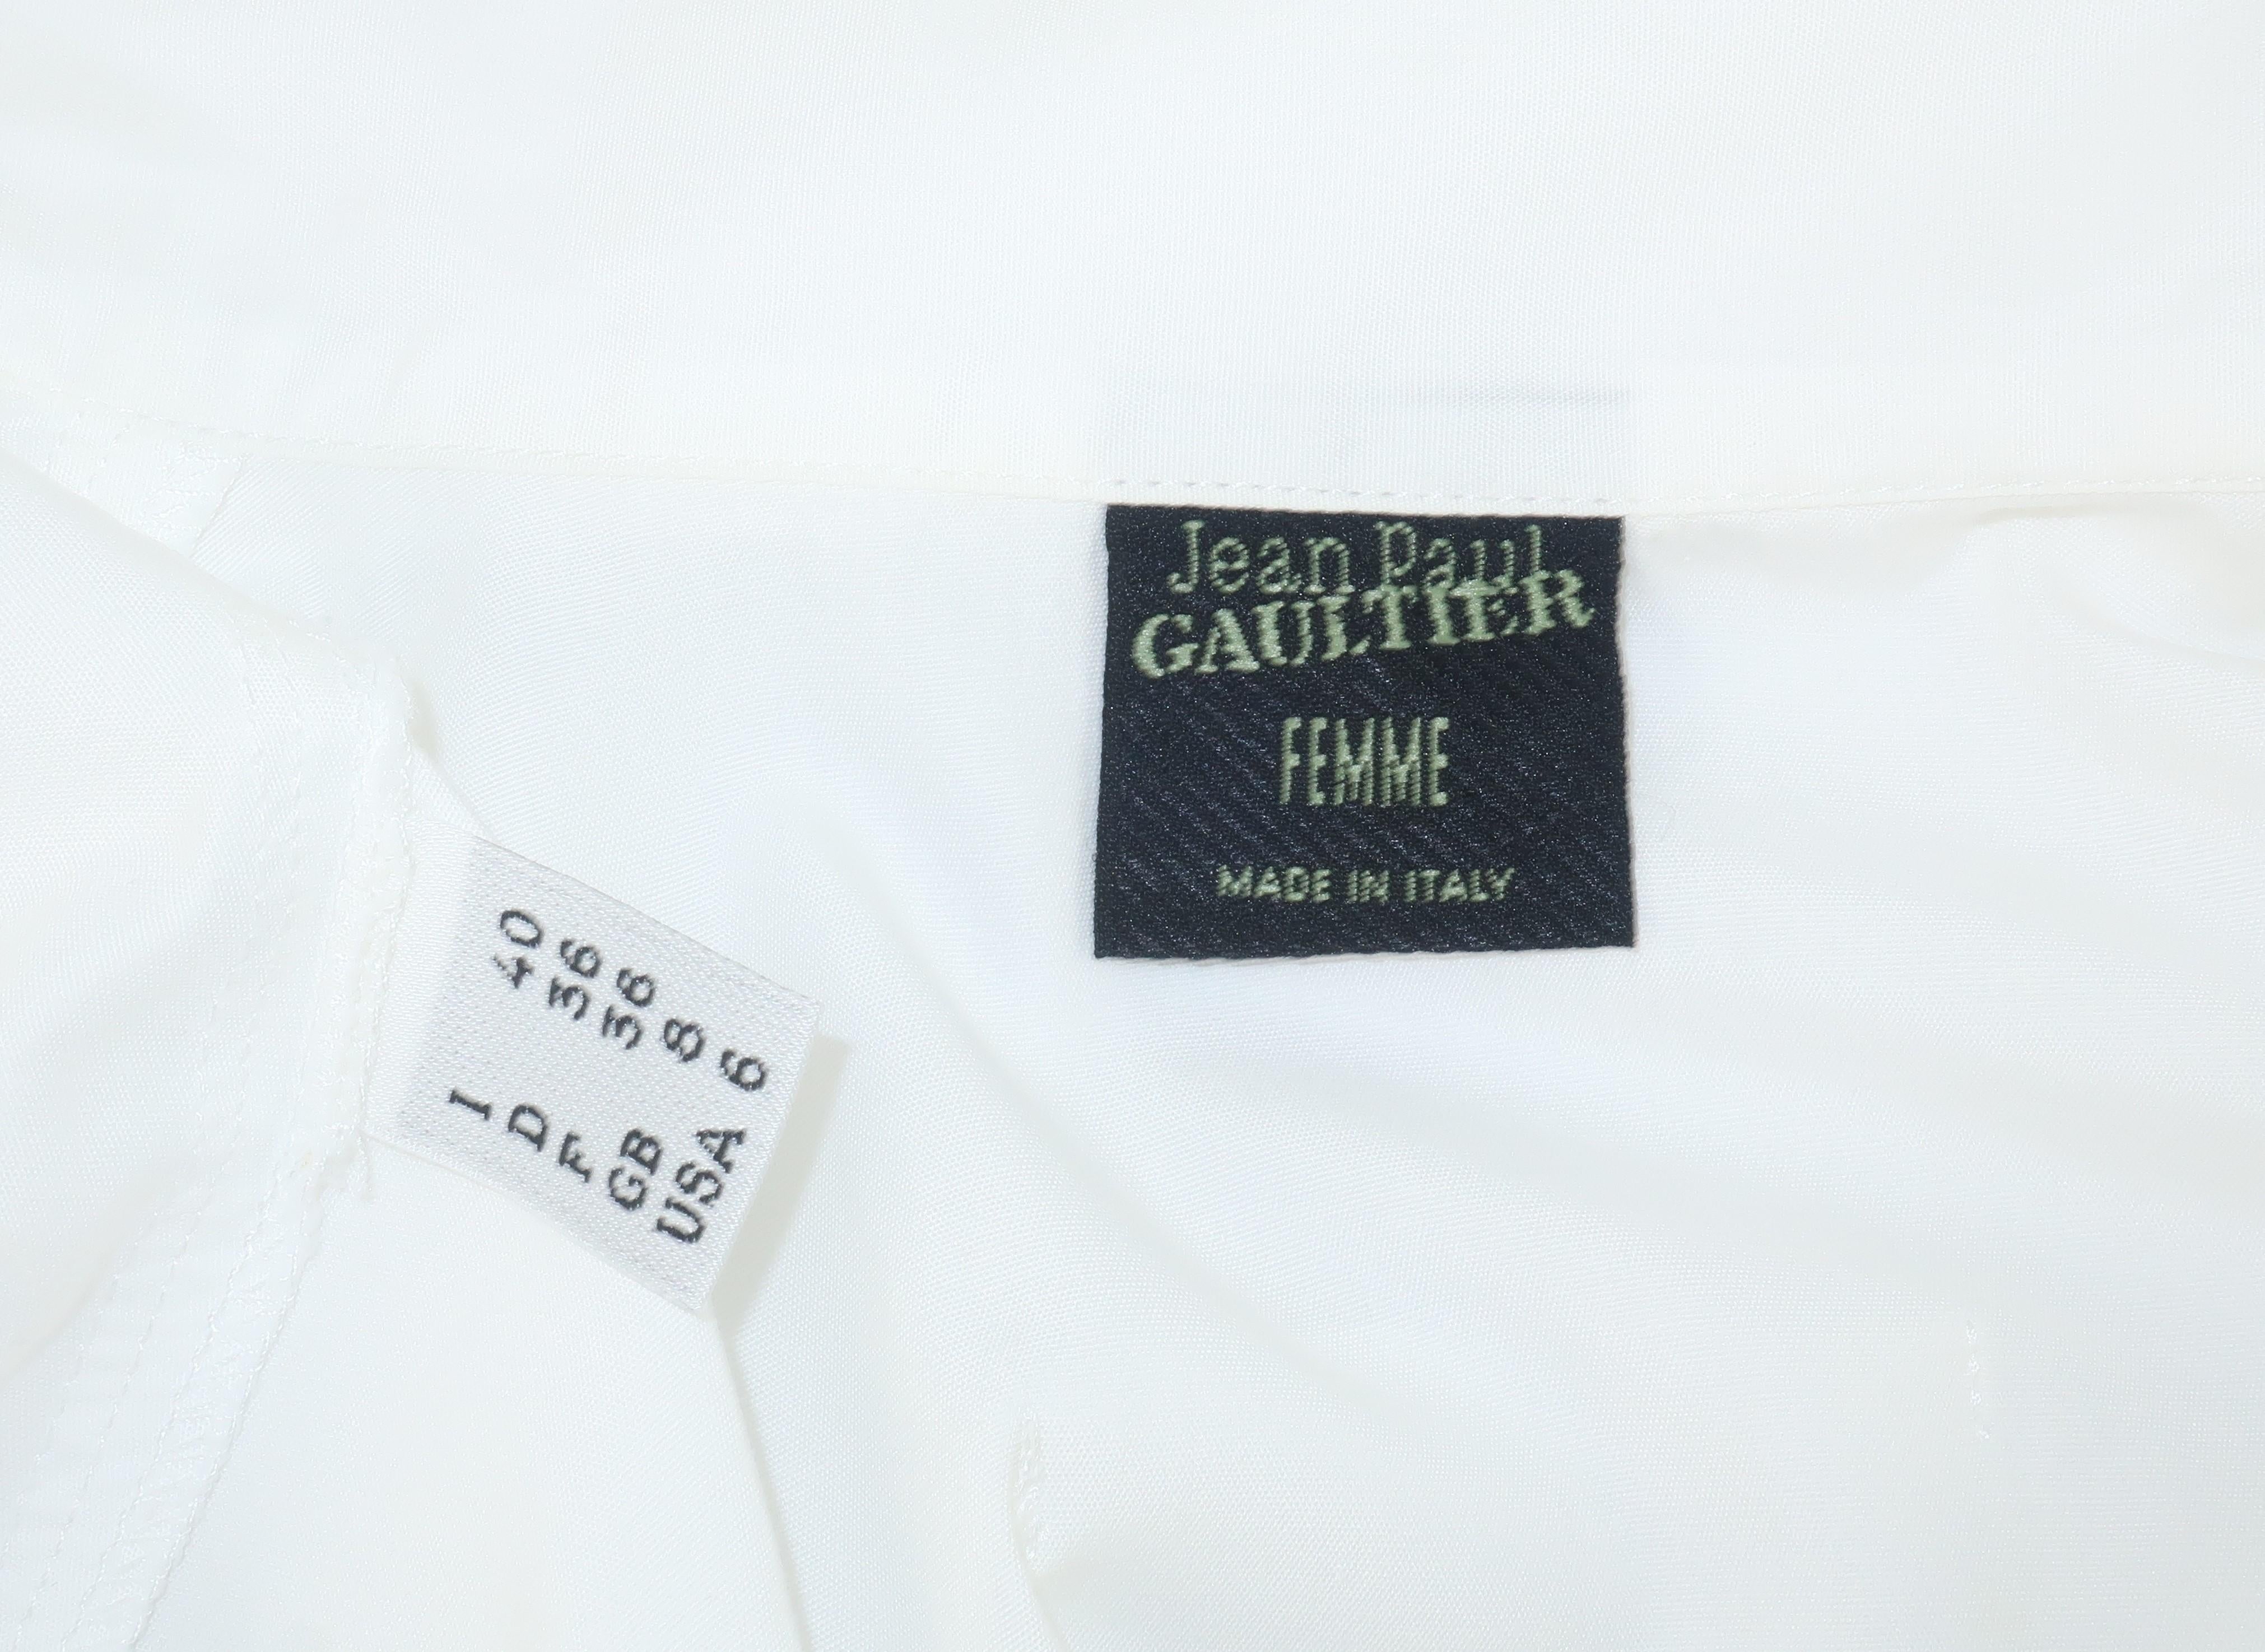 Jean Paul Gaultier White Shirt With Black Leather Restraint Cuffs  5